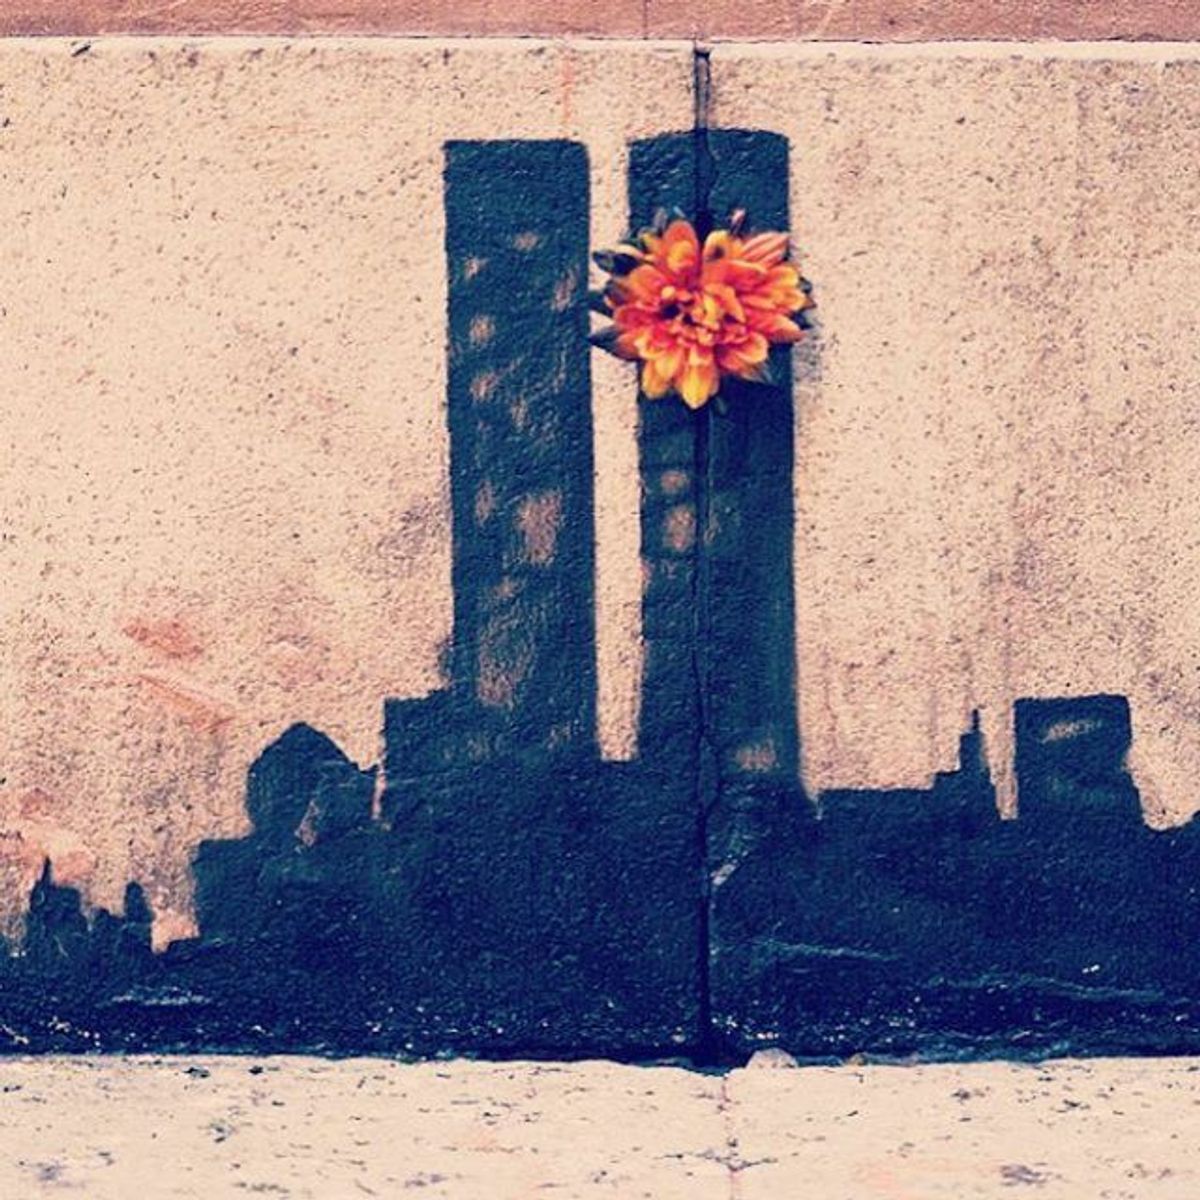 9/11 Through The Eyes Of A 6 Year Old